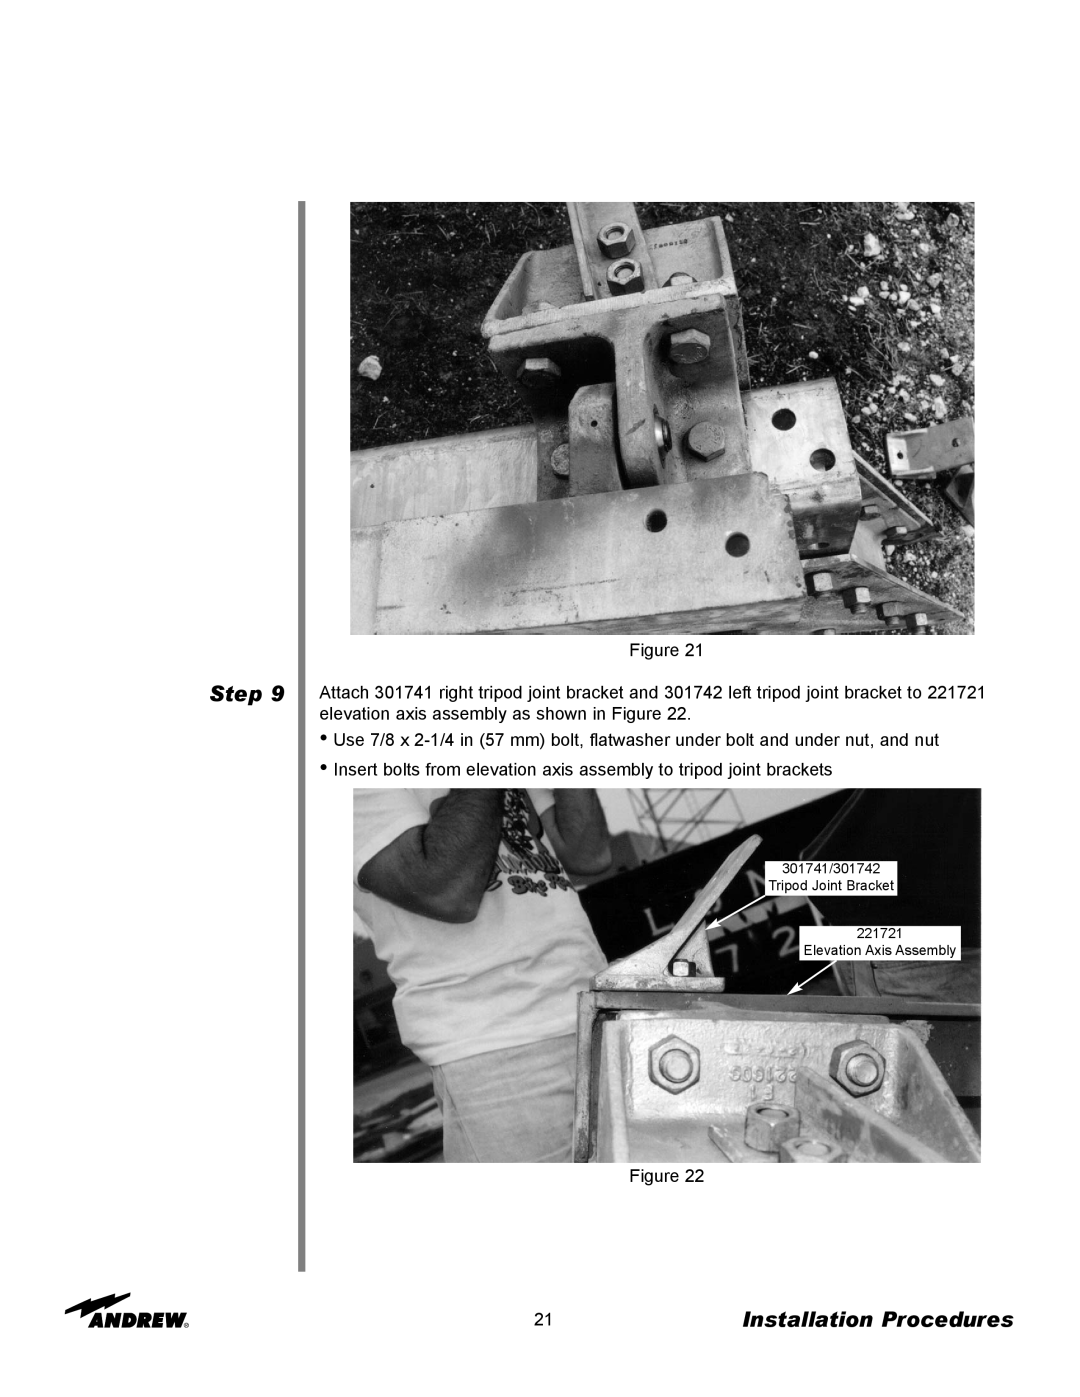 Andrew ES73 Step, Installation Procedures, Figure, 301741/301742 Tripod Joint Bracket 221721, Elevation Axis Assembly 